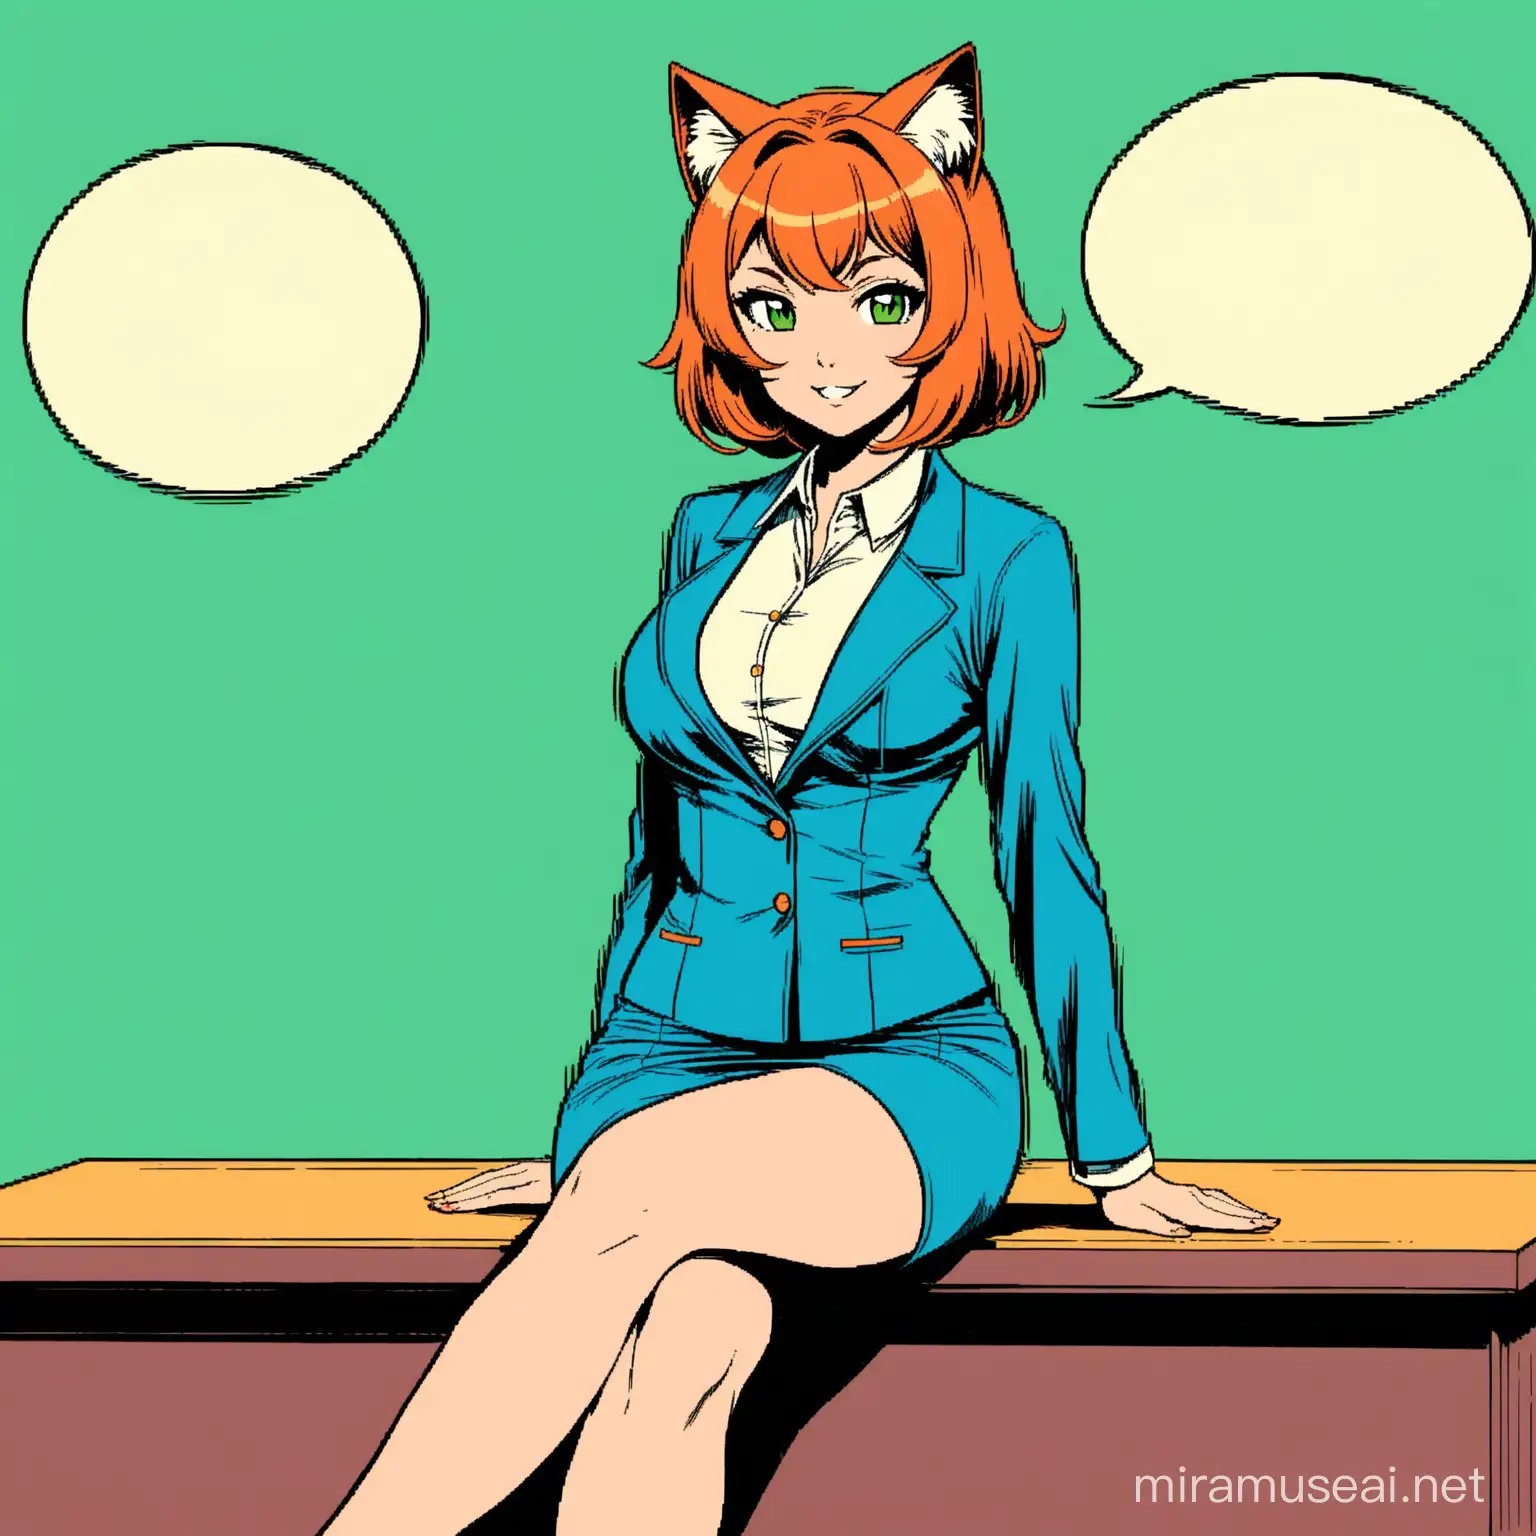 A minimalistic illustration featuring a gorgeous nekomimi with short orange hair and deep green eyes wearing a skin-tight blue formal mini skirt and a revealing blue tailor jacket that accentuates her figure is teaching a class, she is confidently sitting (((crossed legs))) on a desk smiling (((retro comic style)))